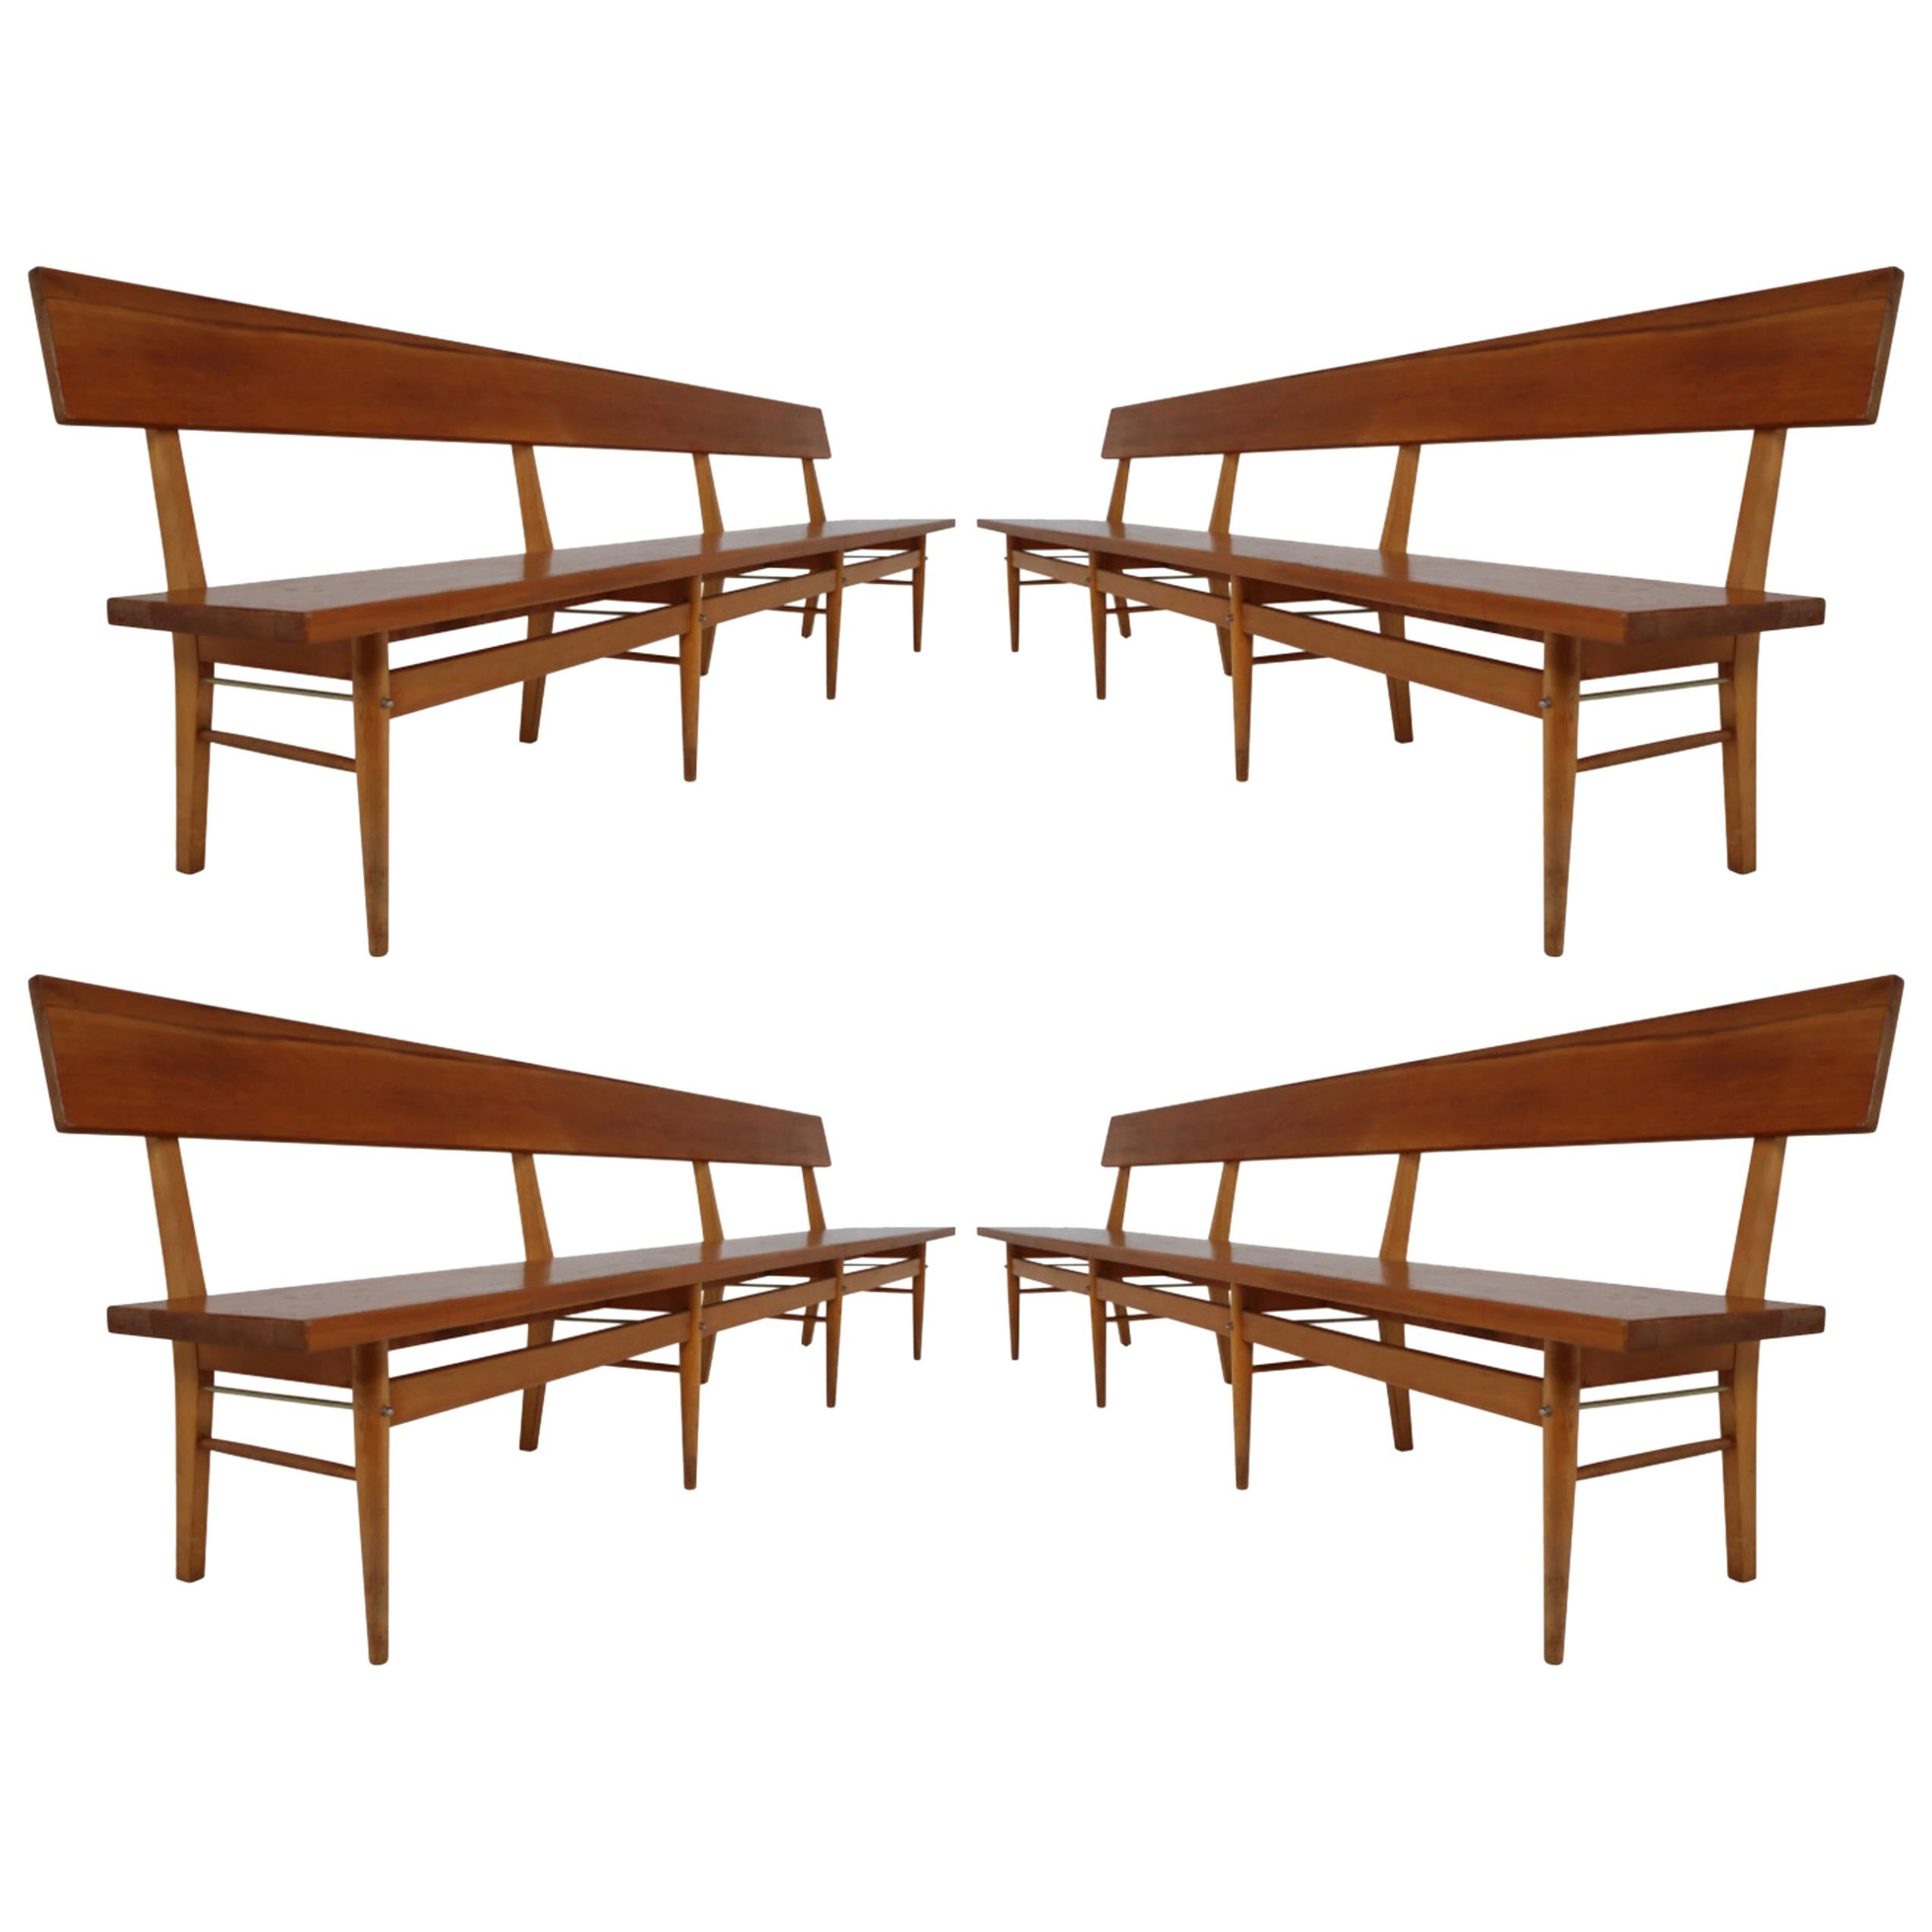 Four Large Mid-20 Century Scandinavian Wooden Benches